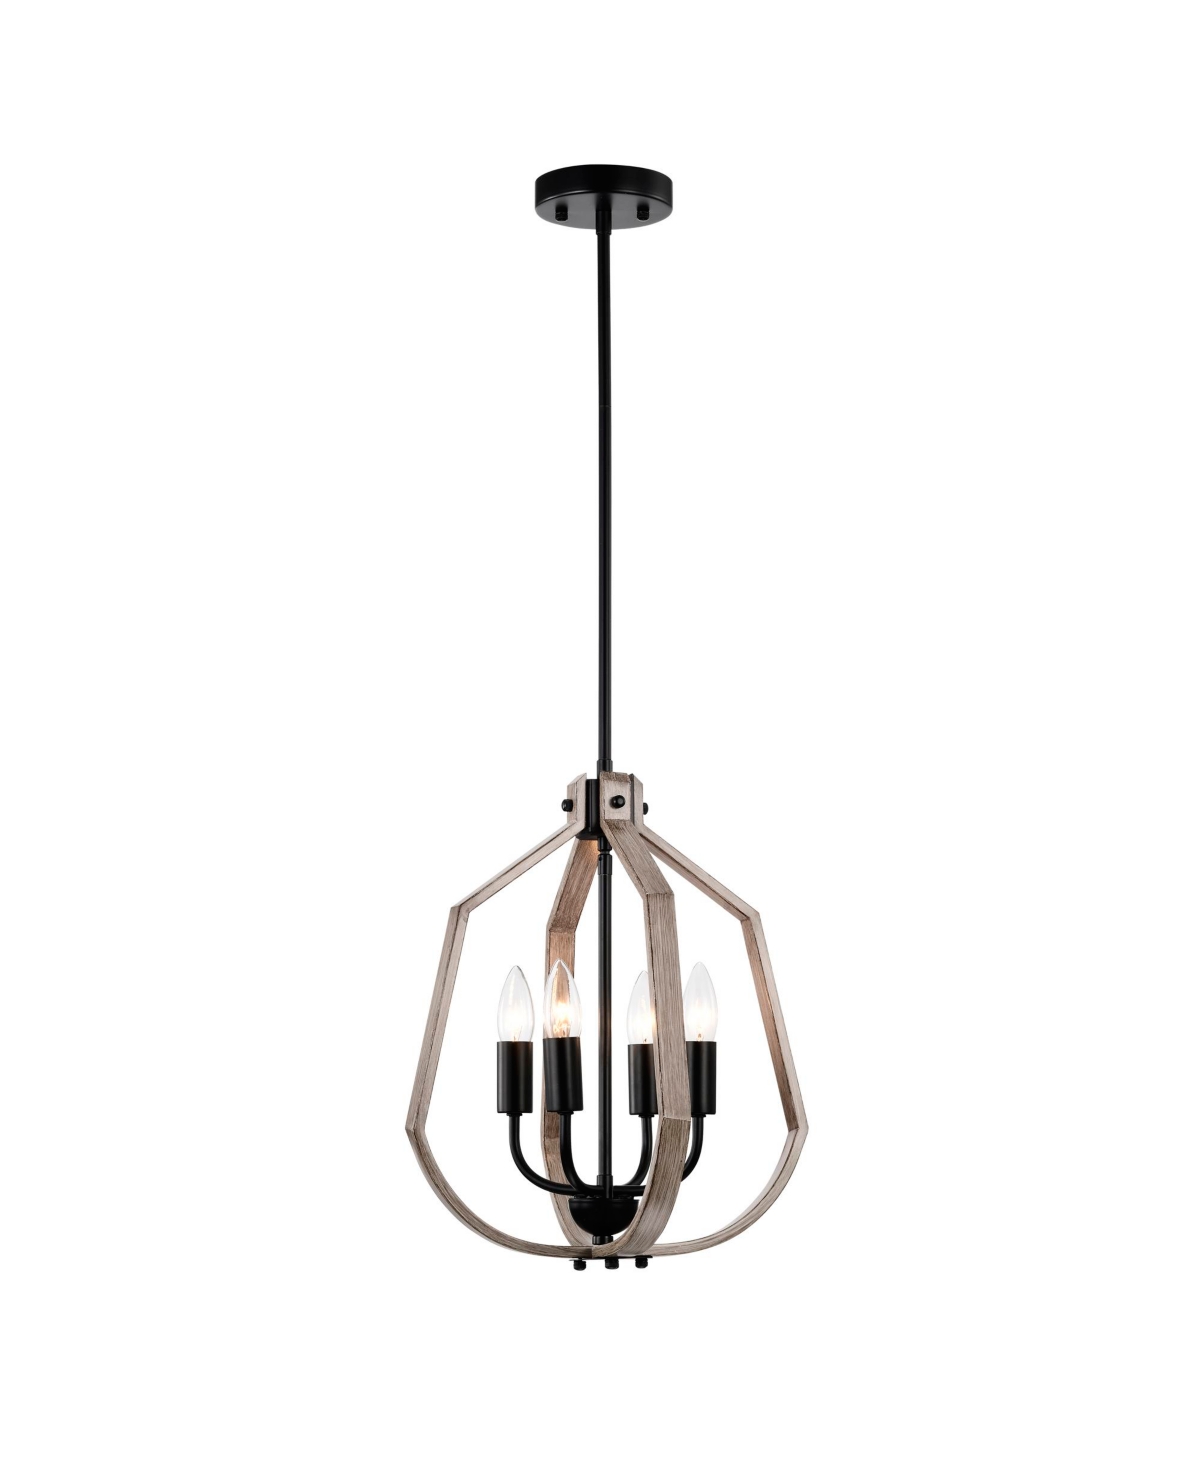 Home Accessories Netu 14" 4-light Indoor Finish Chandelier With Light Kit In Matte Black And Faux Wood Grain